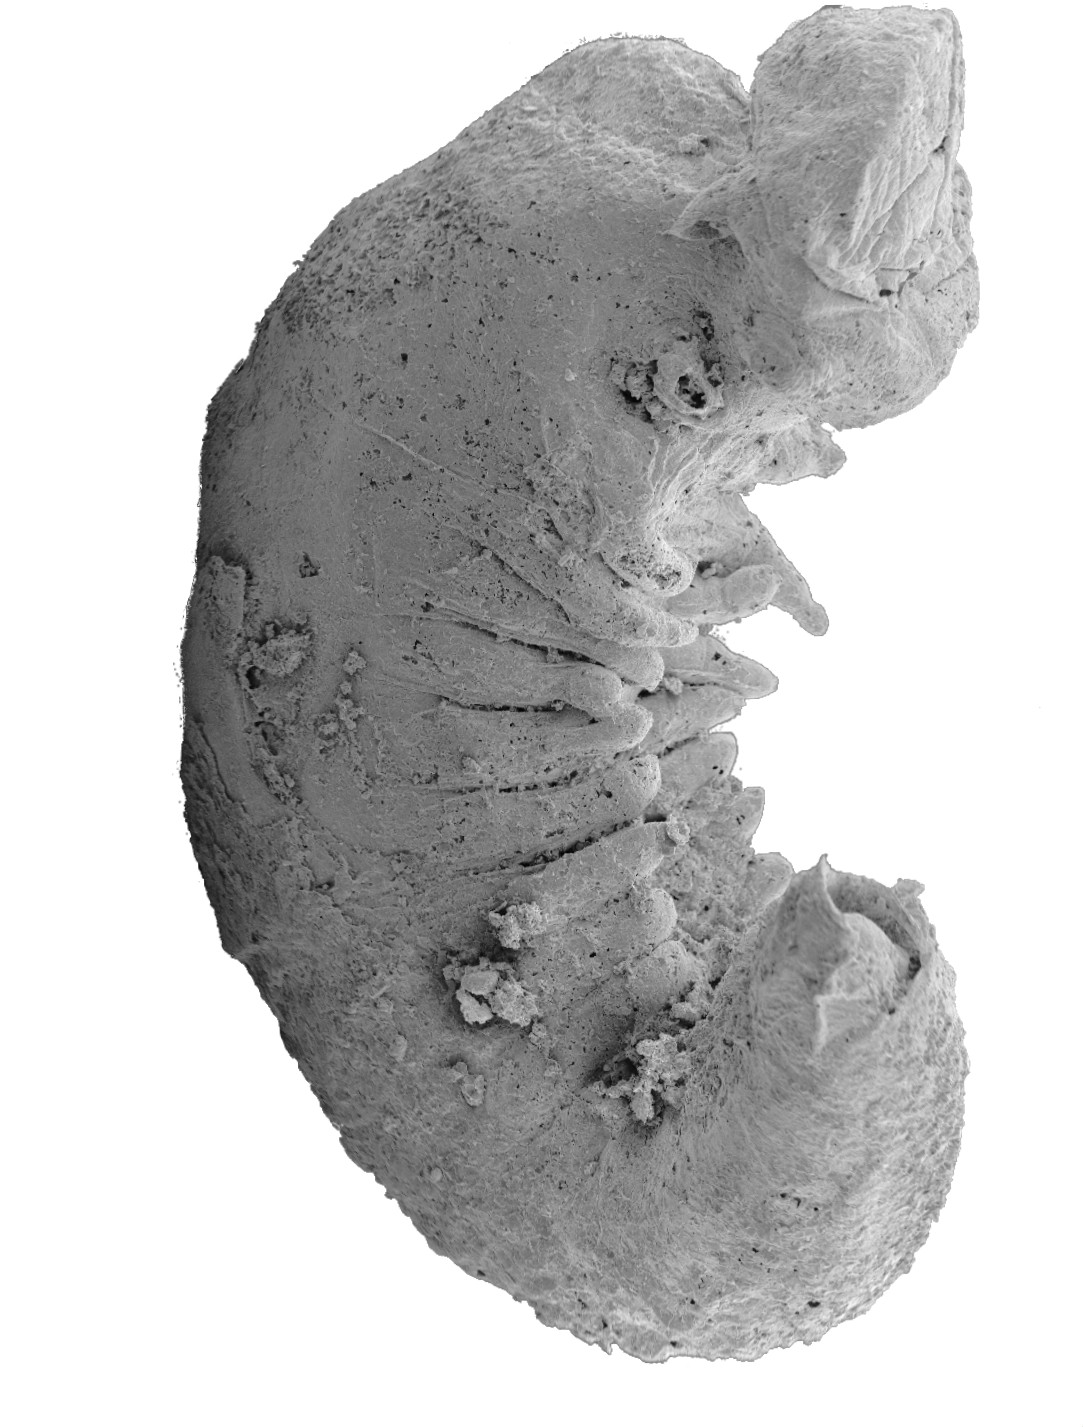 520 Million-Year-Old Larva Fossil Reveals How Insects Evolved